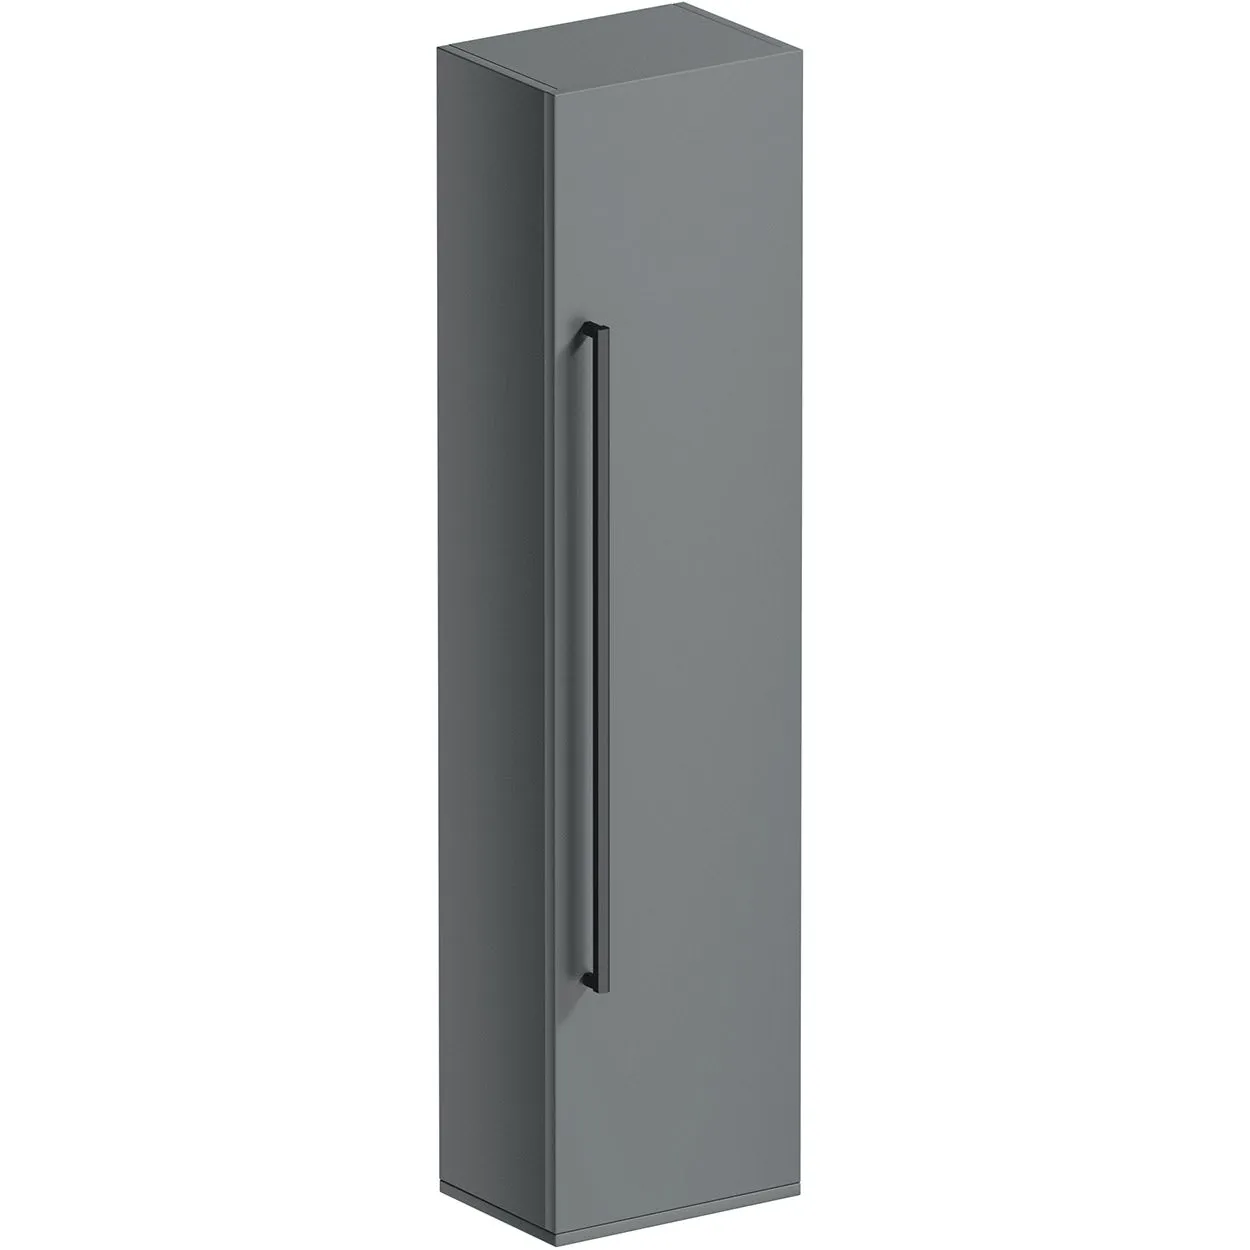 Orchard Derwent stone grey tall wall hung cabinet with black handle 1400 x 350mm